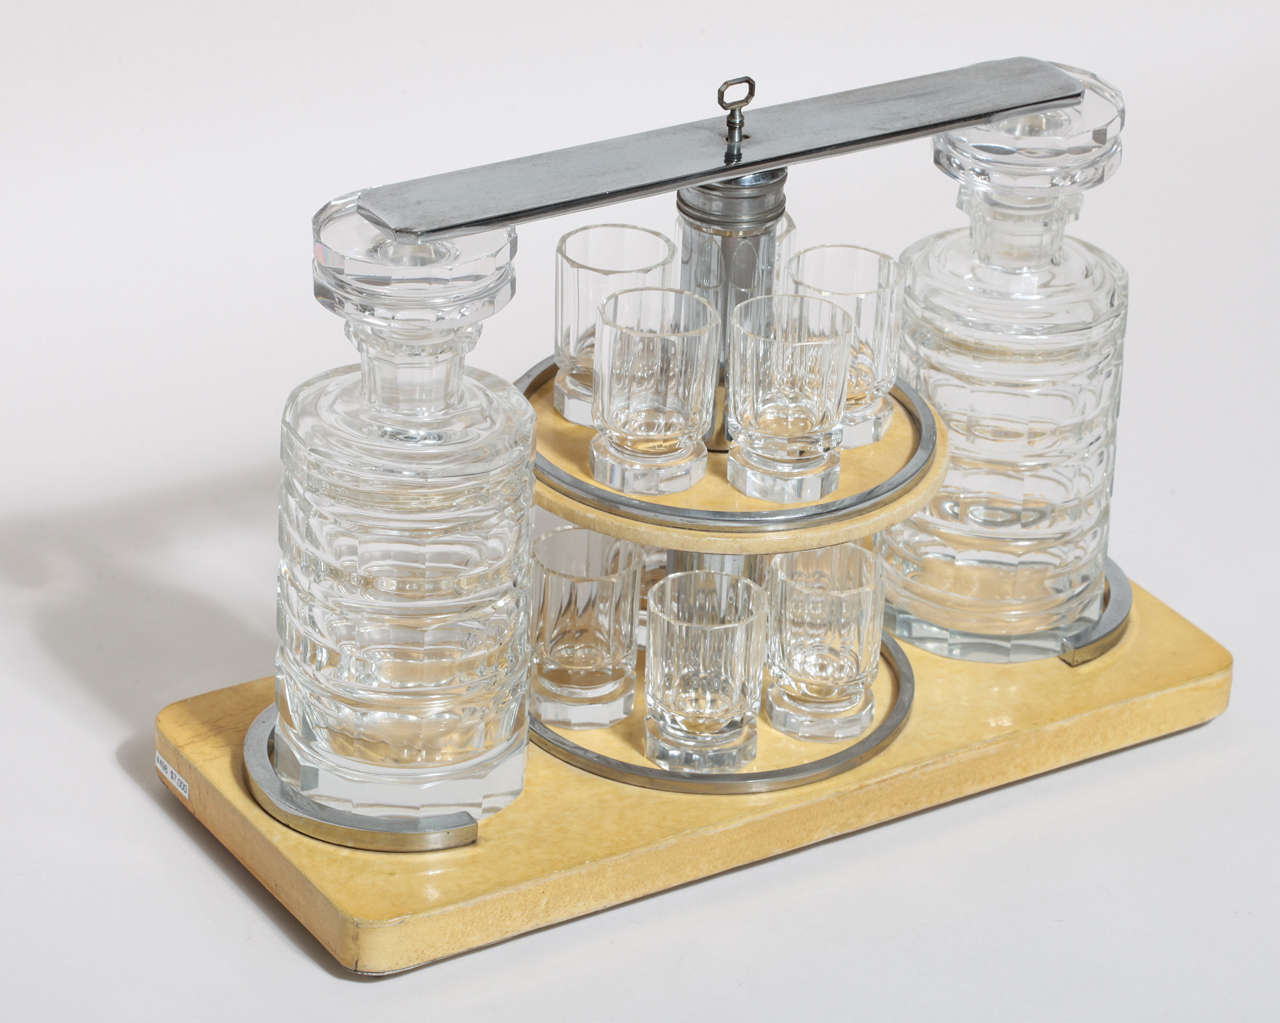 Liquor caddy on parchment covered base and chrome stem with two cut crystal decanters and ten cut crystal glasses. It has a locking bar with original key.